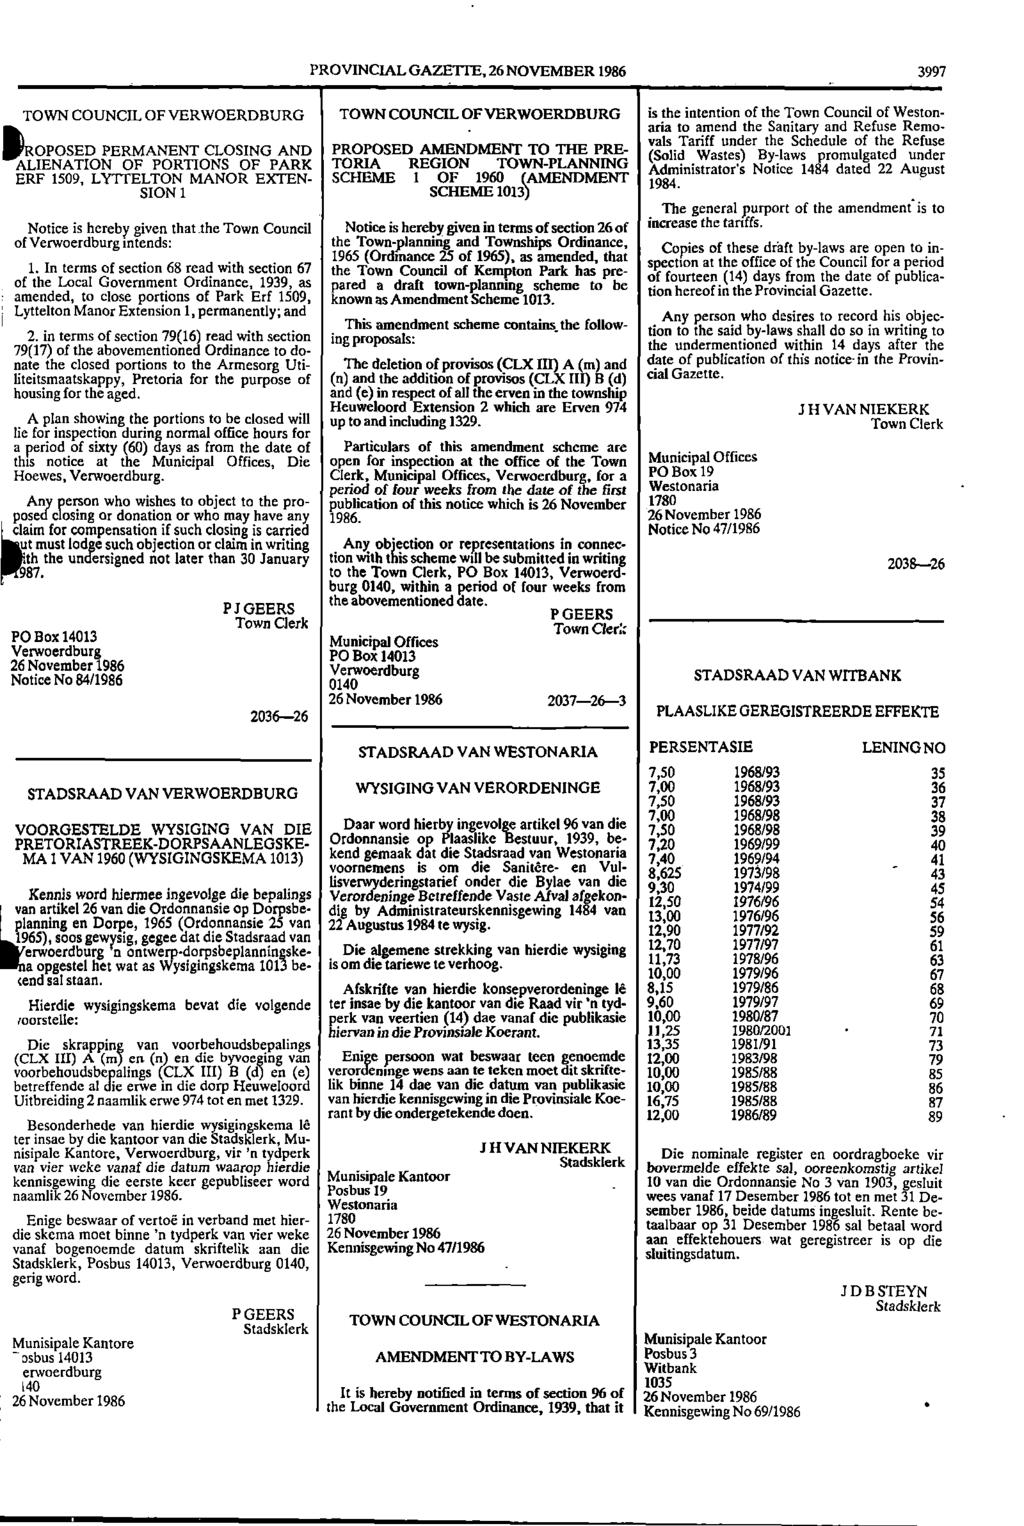 PROVINCIAL GAZETTE, 26 NOVEMBER 1986 3997 TOWN COUNCIL OF VERWOERDBURG TOWN COUNCIL OF VERWOERDBURG is the intention of the Town Council of Weston aria to amend the Sanitary and Refuse Remo "PROPOSED